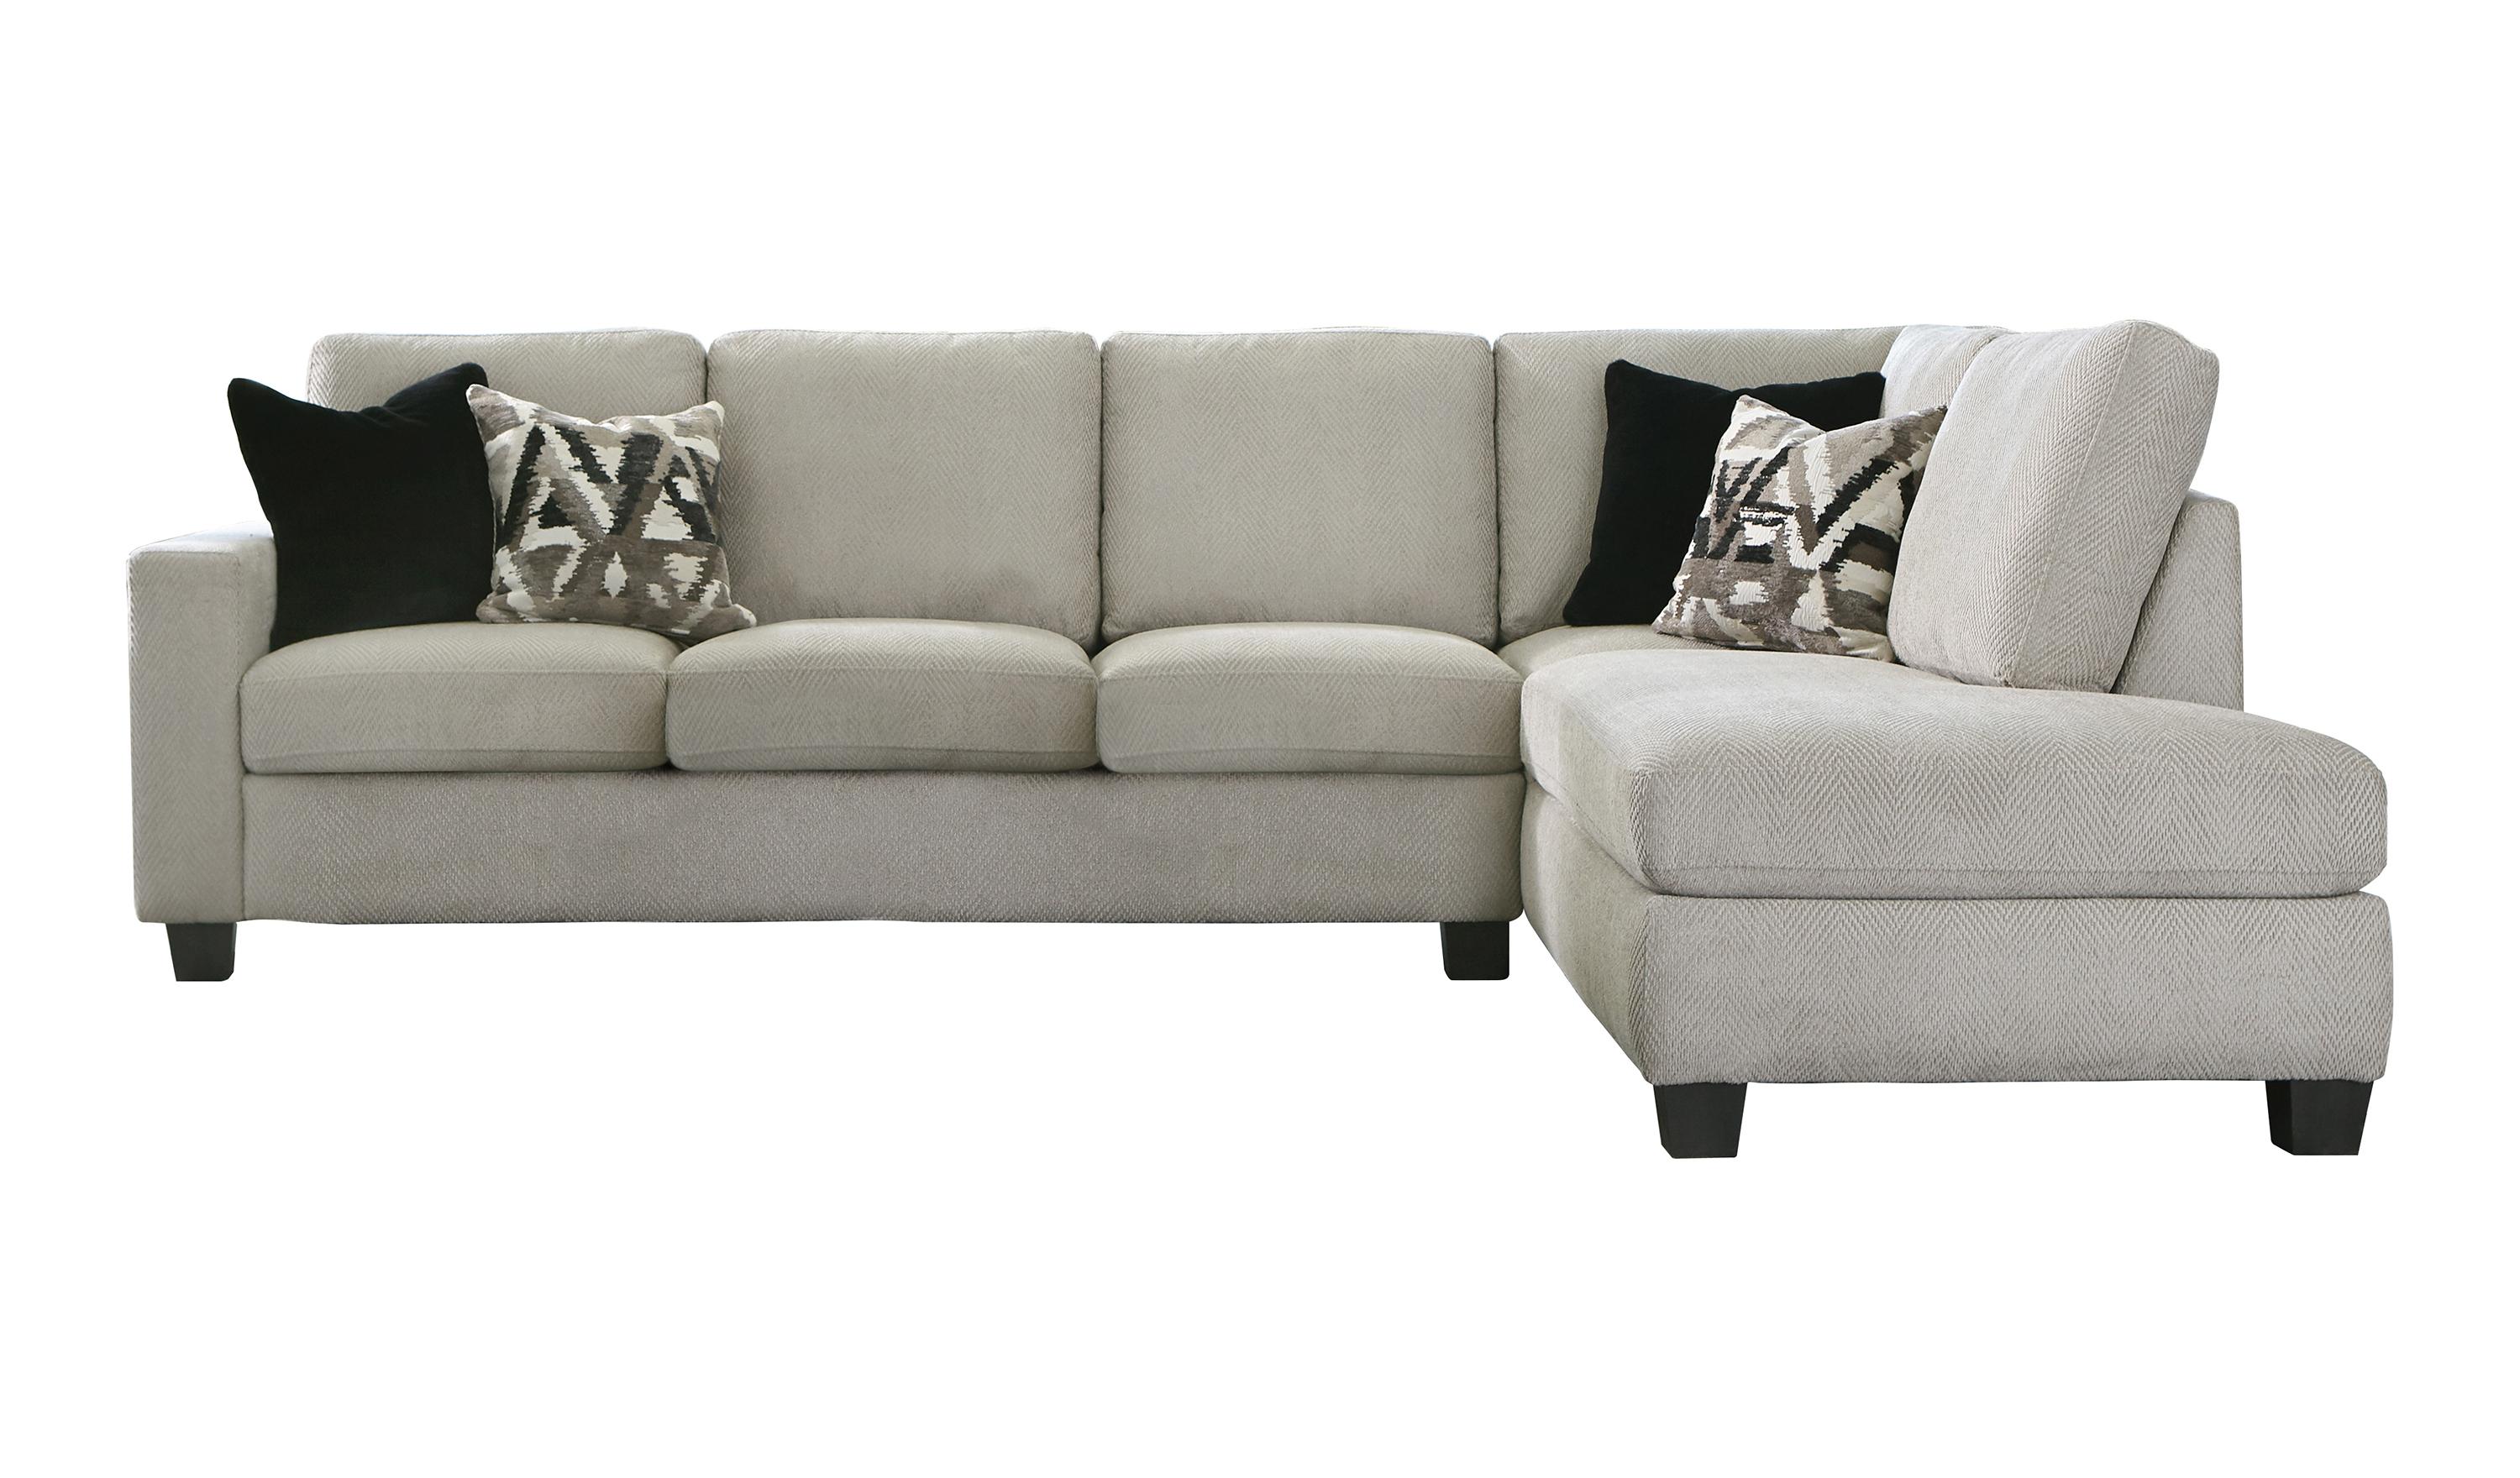 Modern Sectional 509766 Whitson 509766 in Stone Chenille